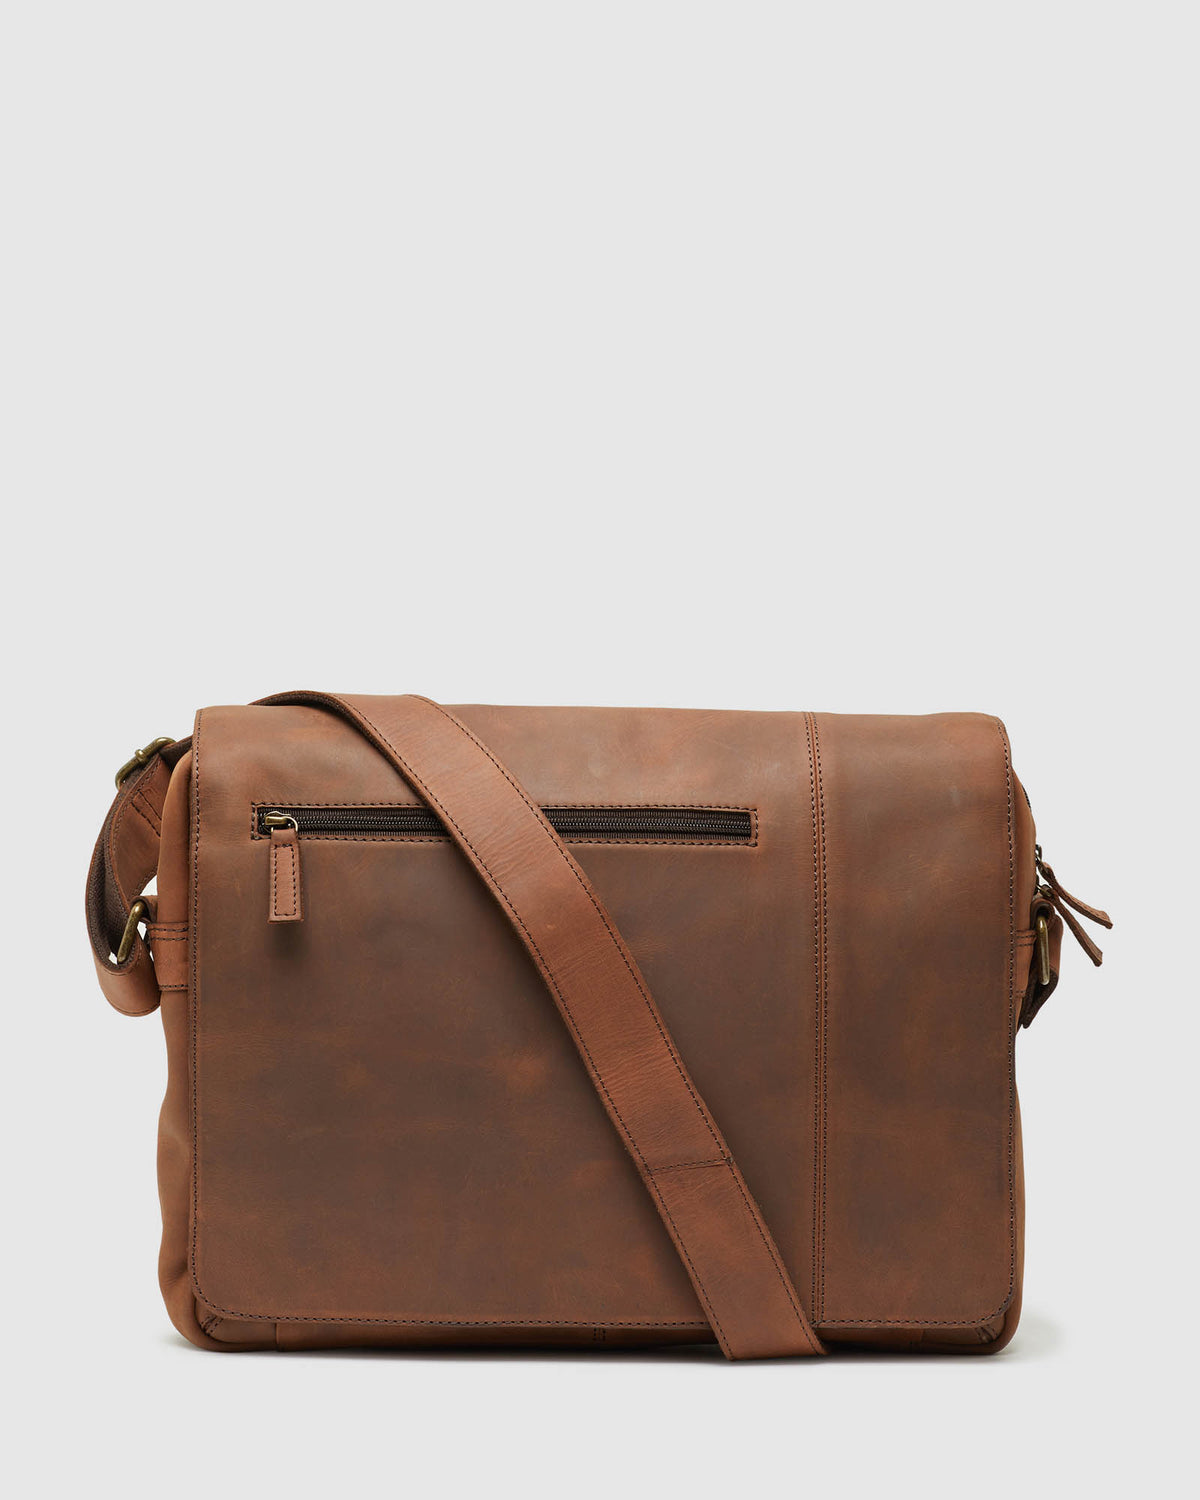 JOHNNY LEATHER MESSENGER BAG - AVAILABLE ~ 1-2 weeks MENS ACCESSORIES